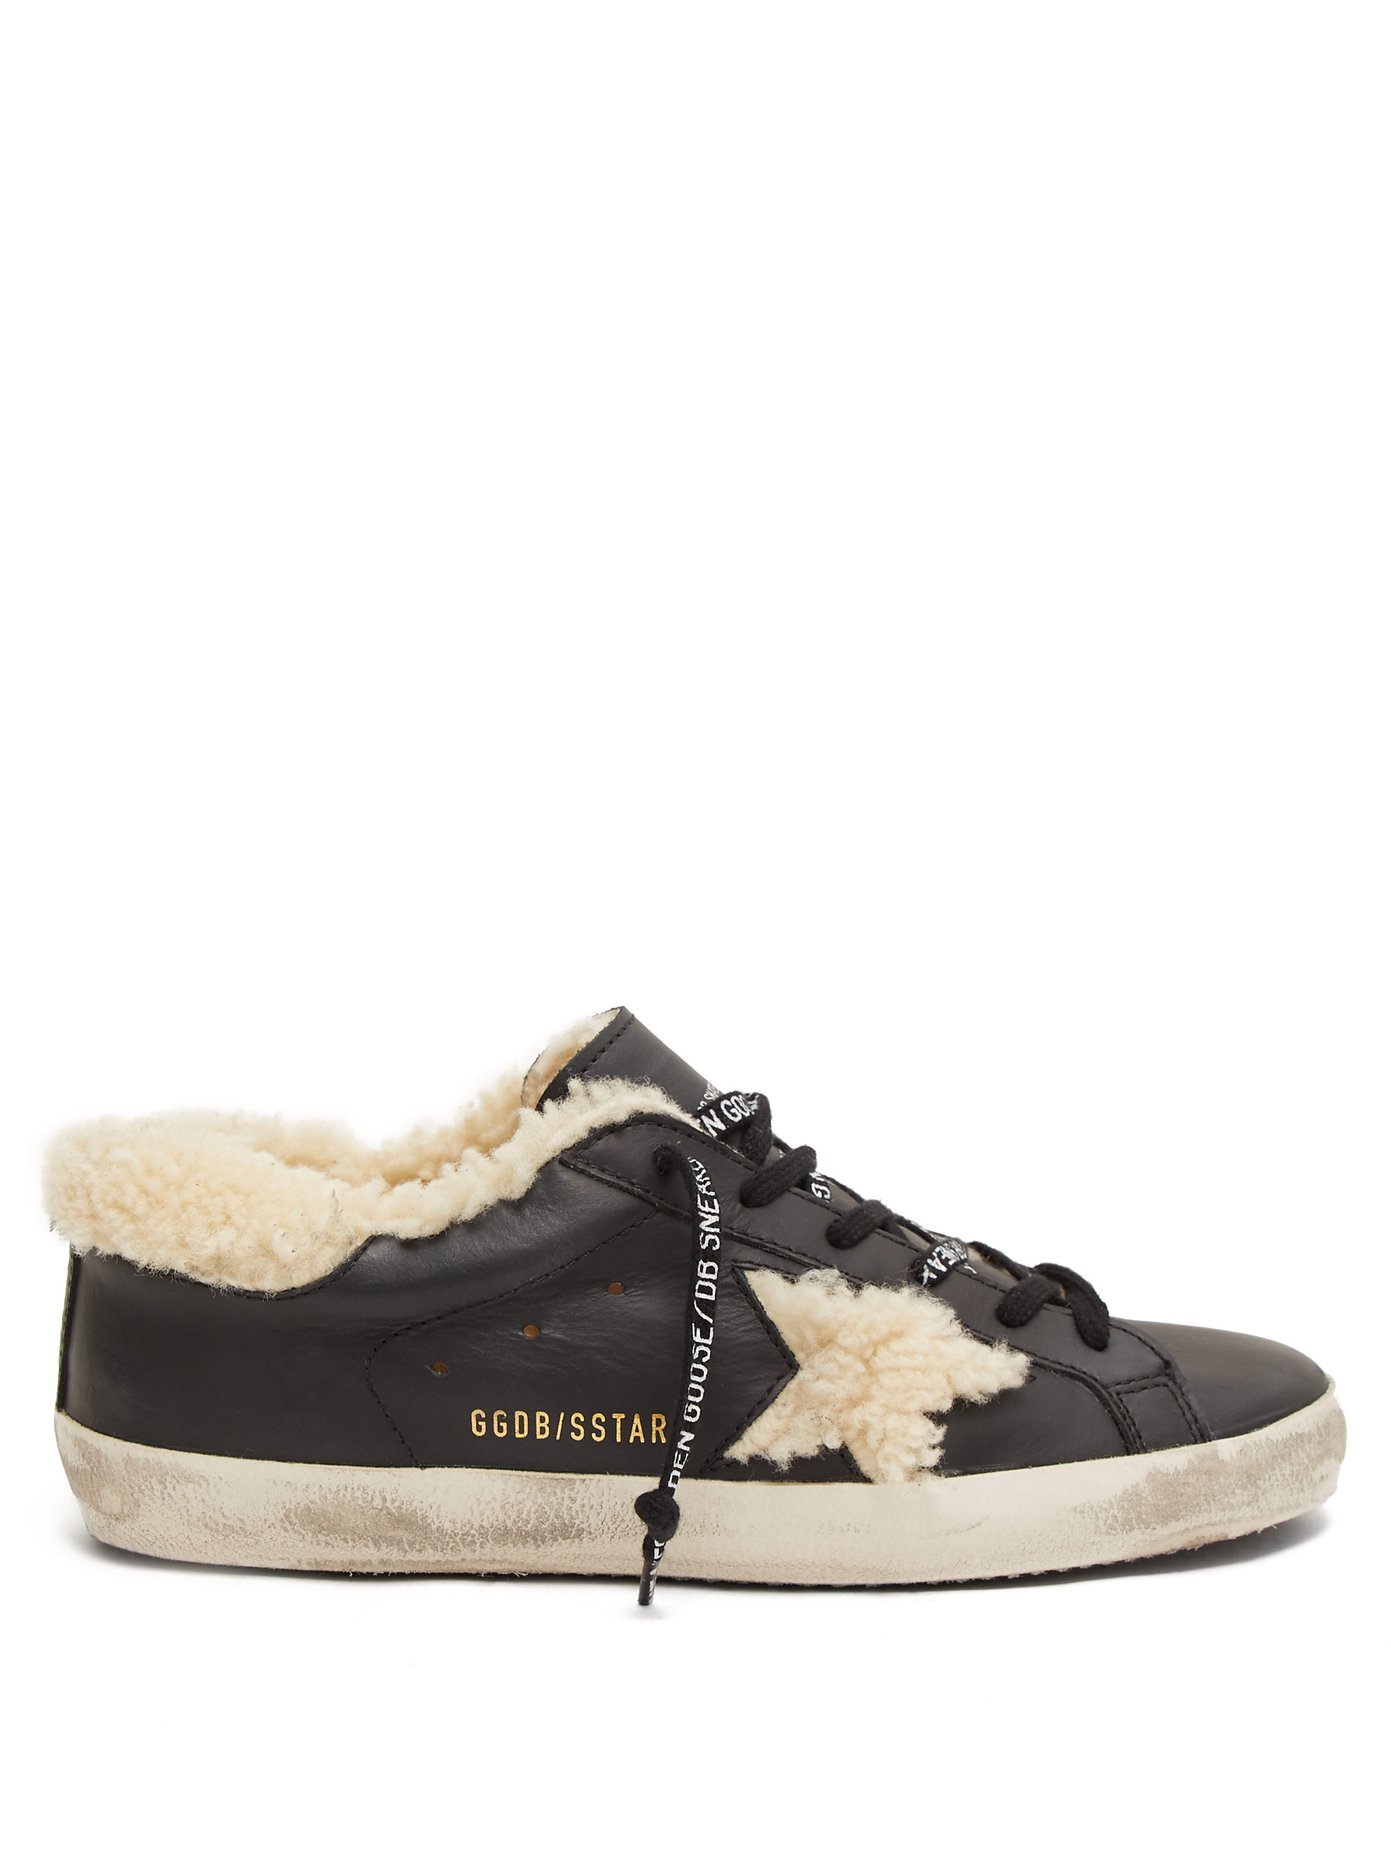 golden goose shearling lined